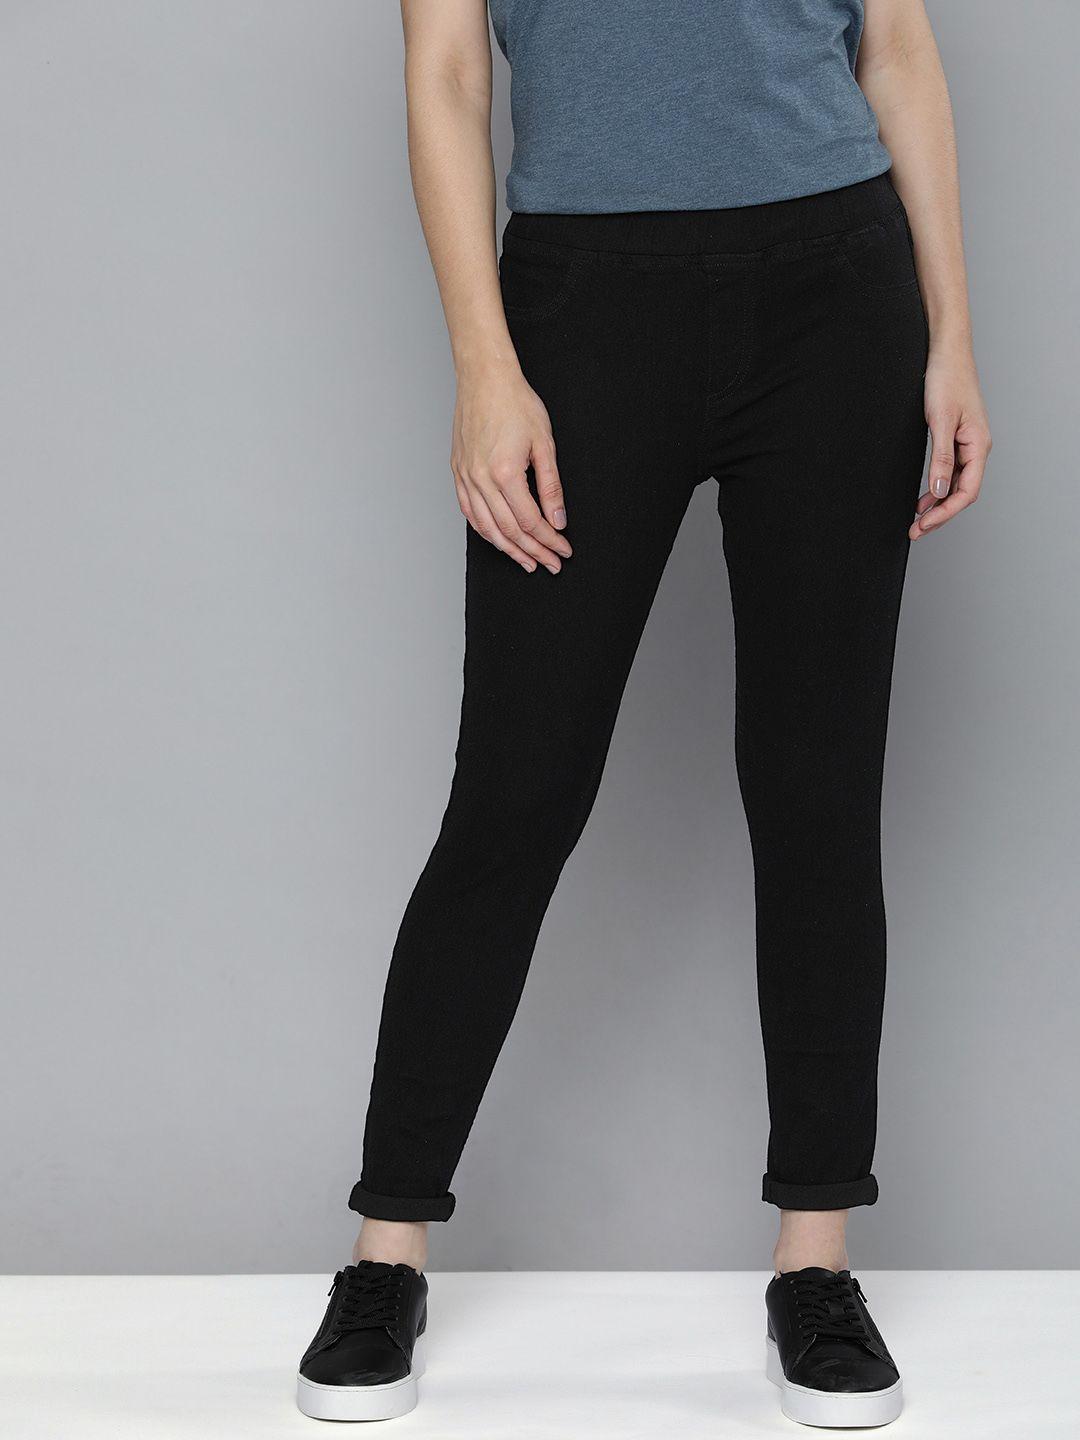 here&now women black slim fit stretchable jeans